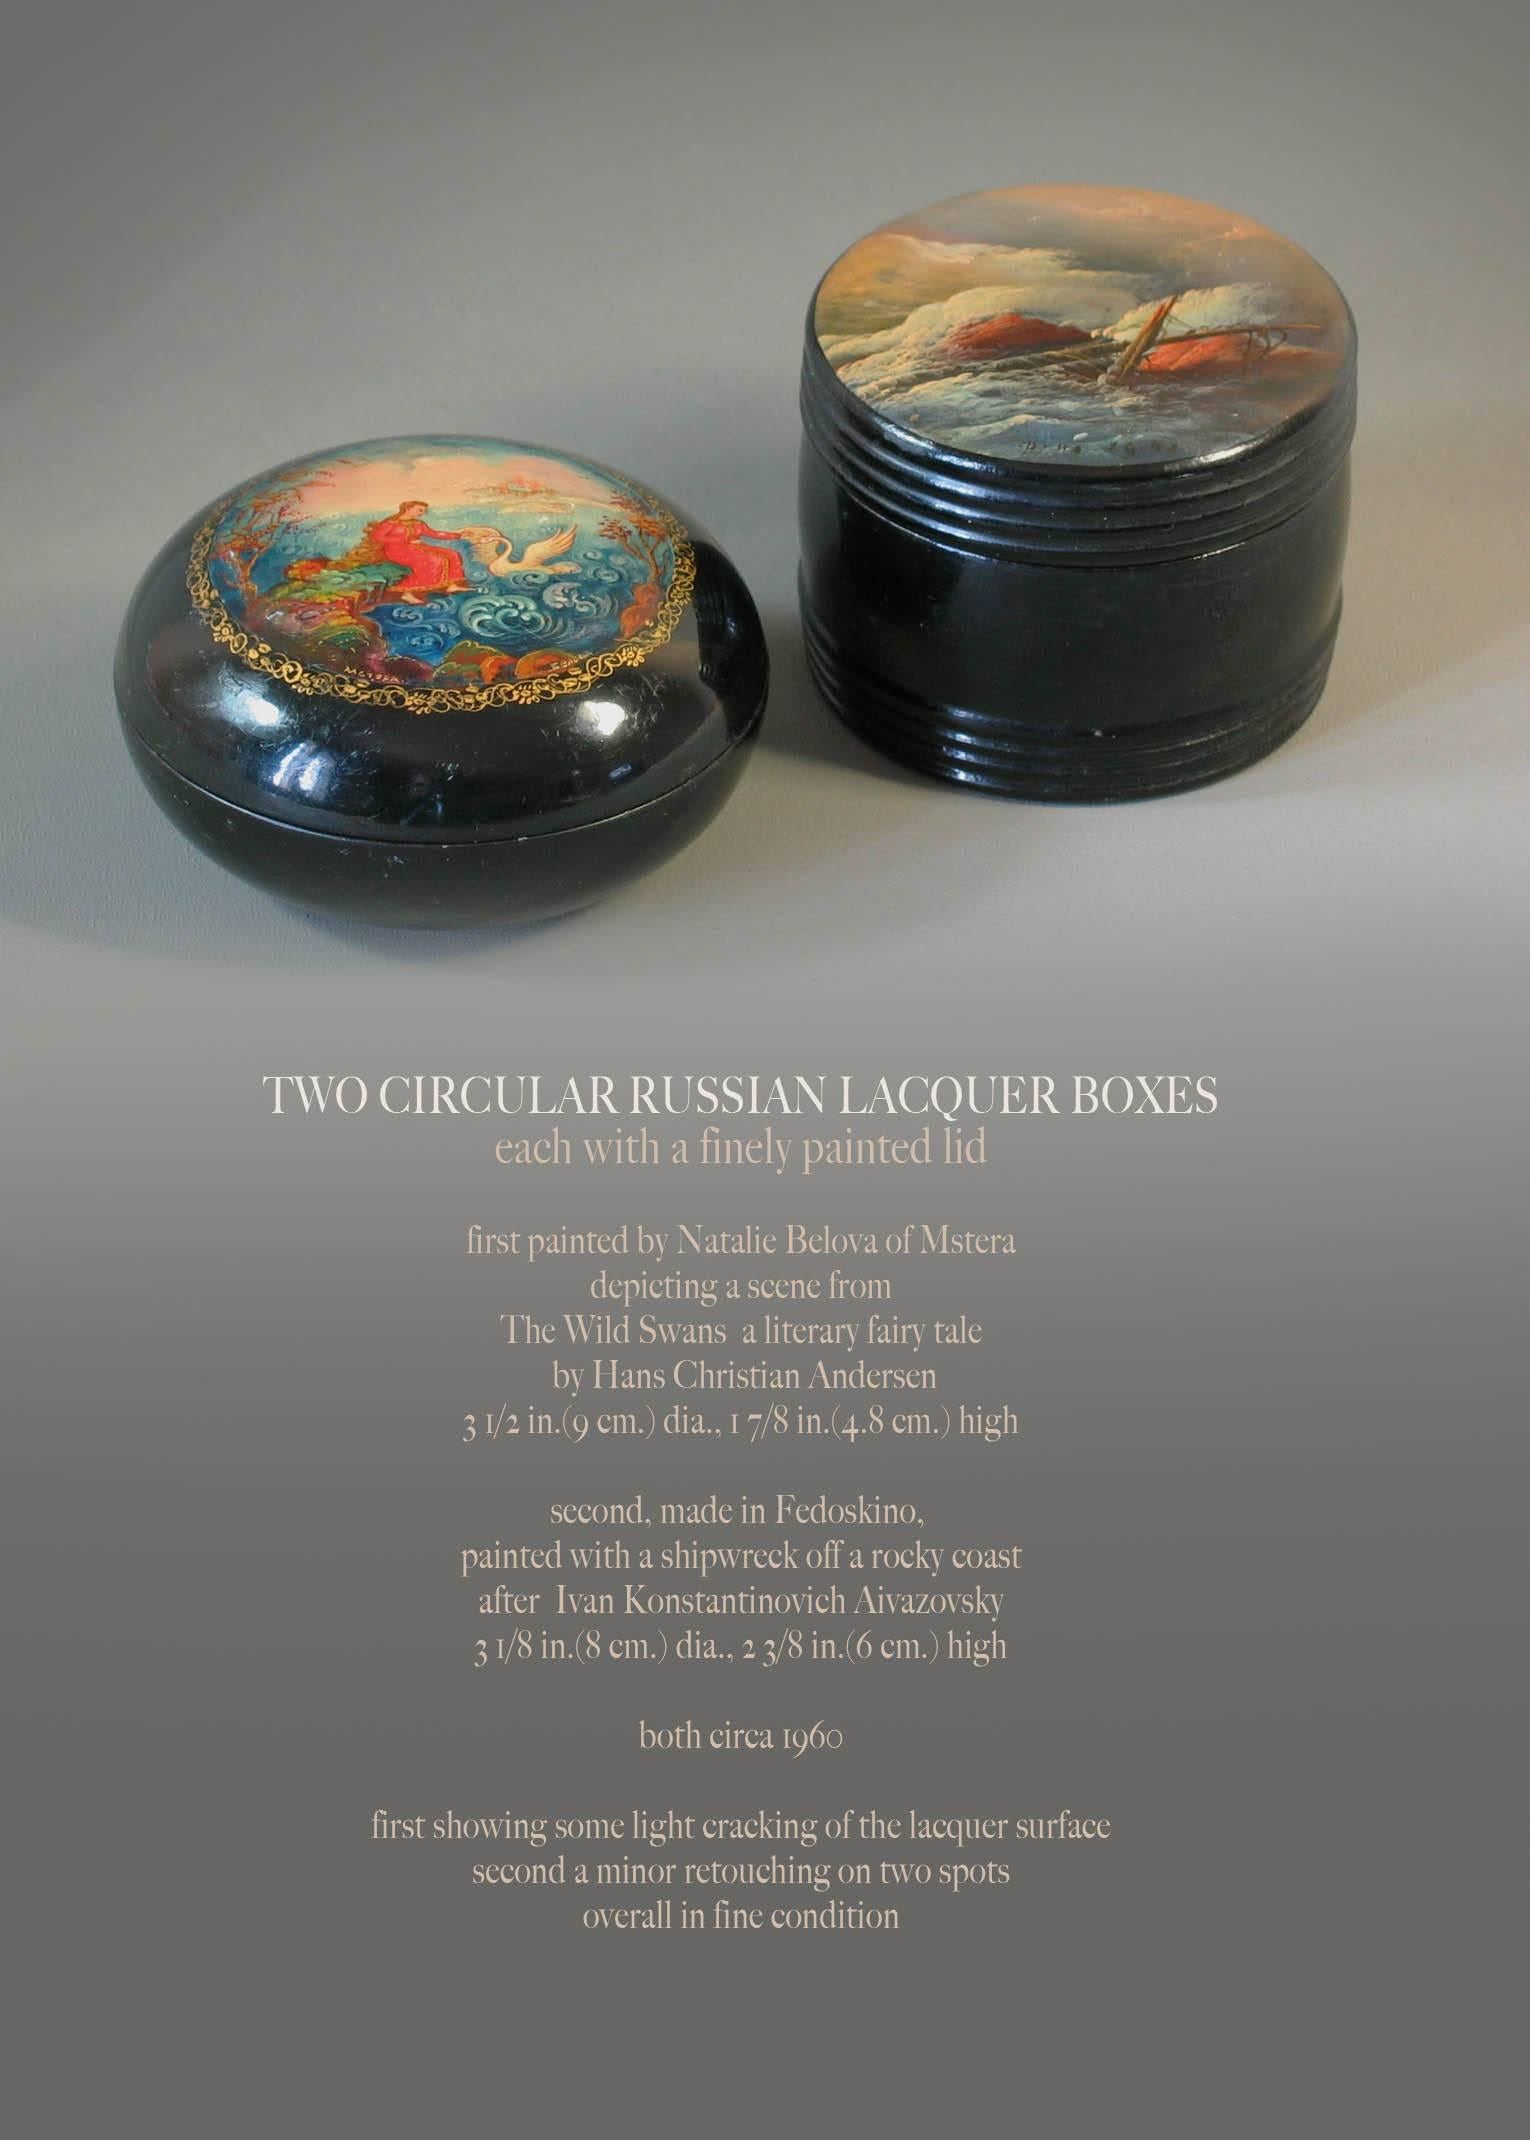 Two circular Russian lacquer boxes, each with a finely painted lid.

First painted by Natalie Belova of Mstera depicting a scene from The Wild Swans, a literary fairy tale by Hans Christian Andersen, measuring 3 1/2